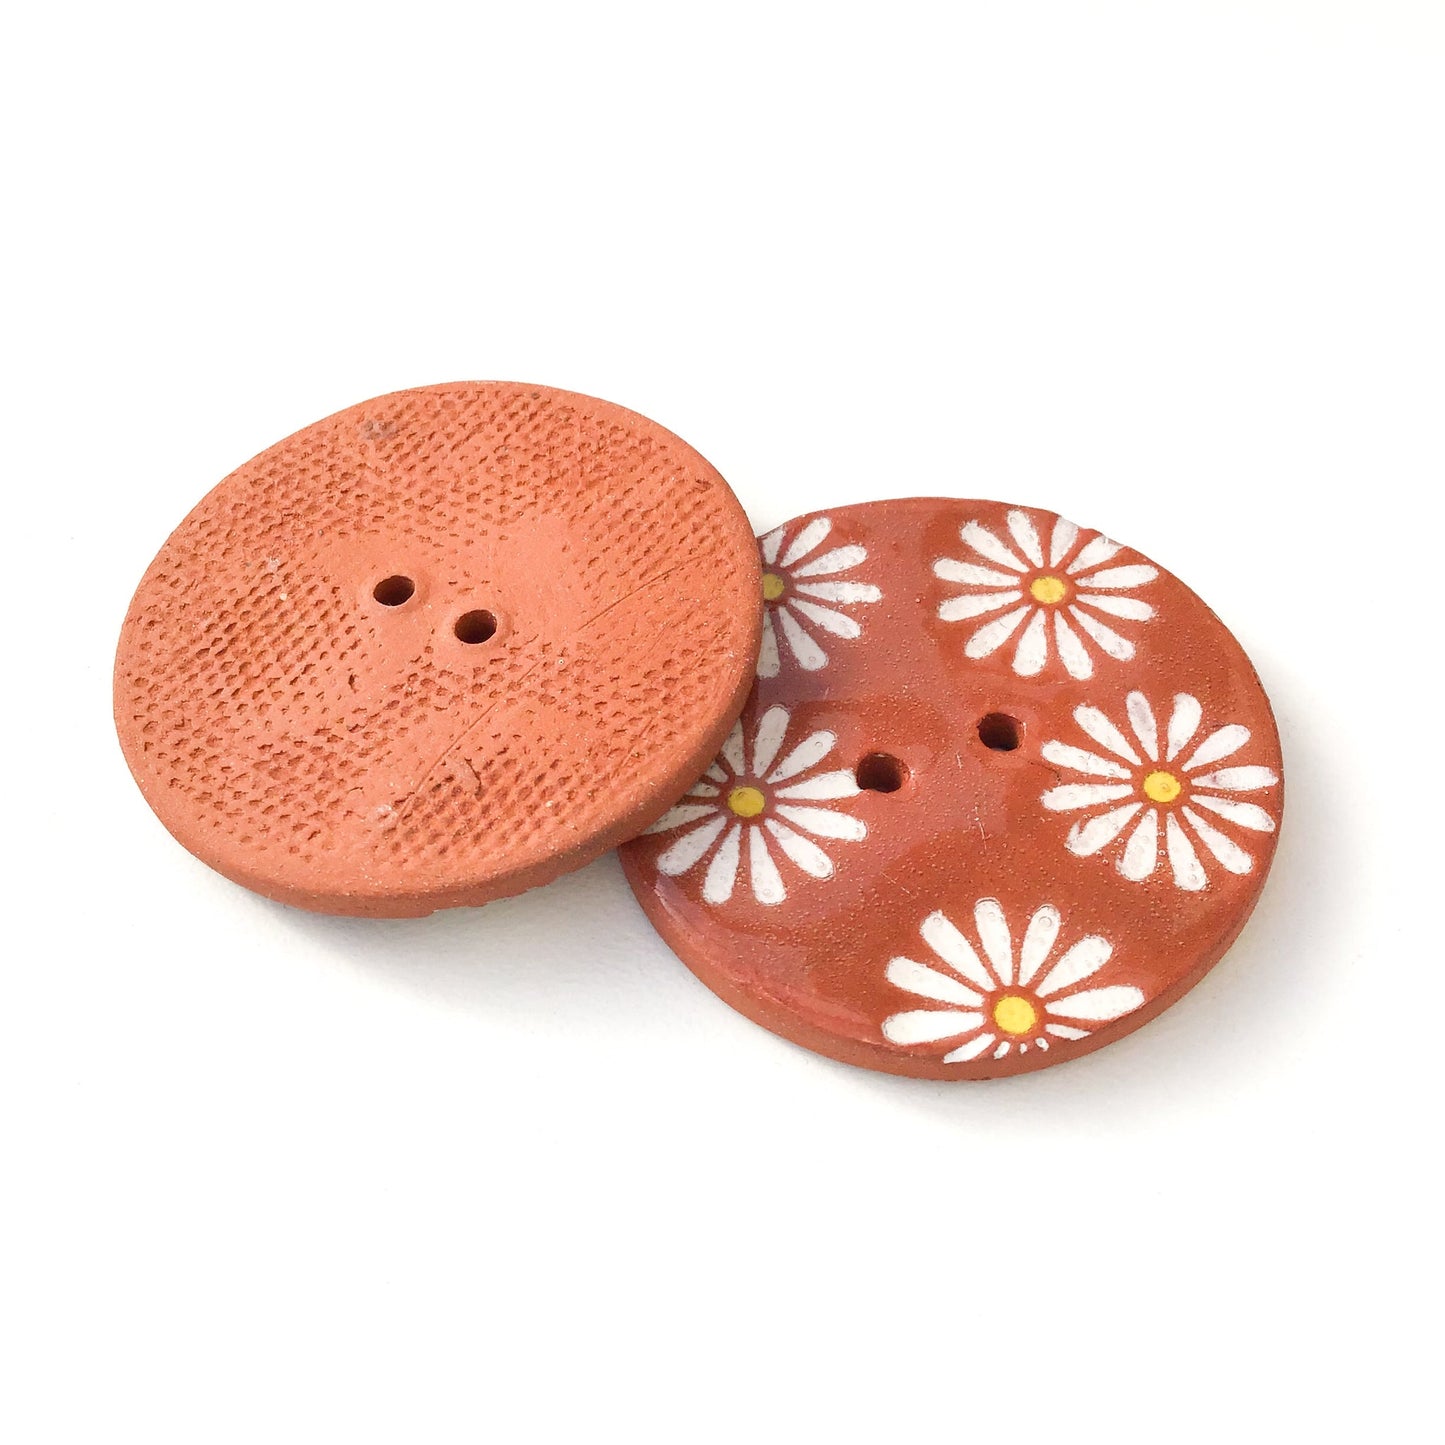 (Wholesale Accounts Only) 1 3/8" Daisy - round - flat - red clay